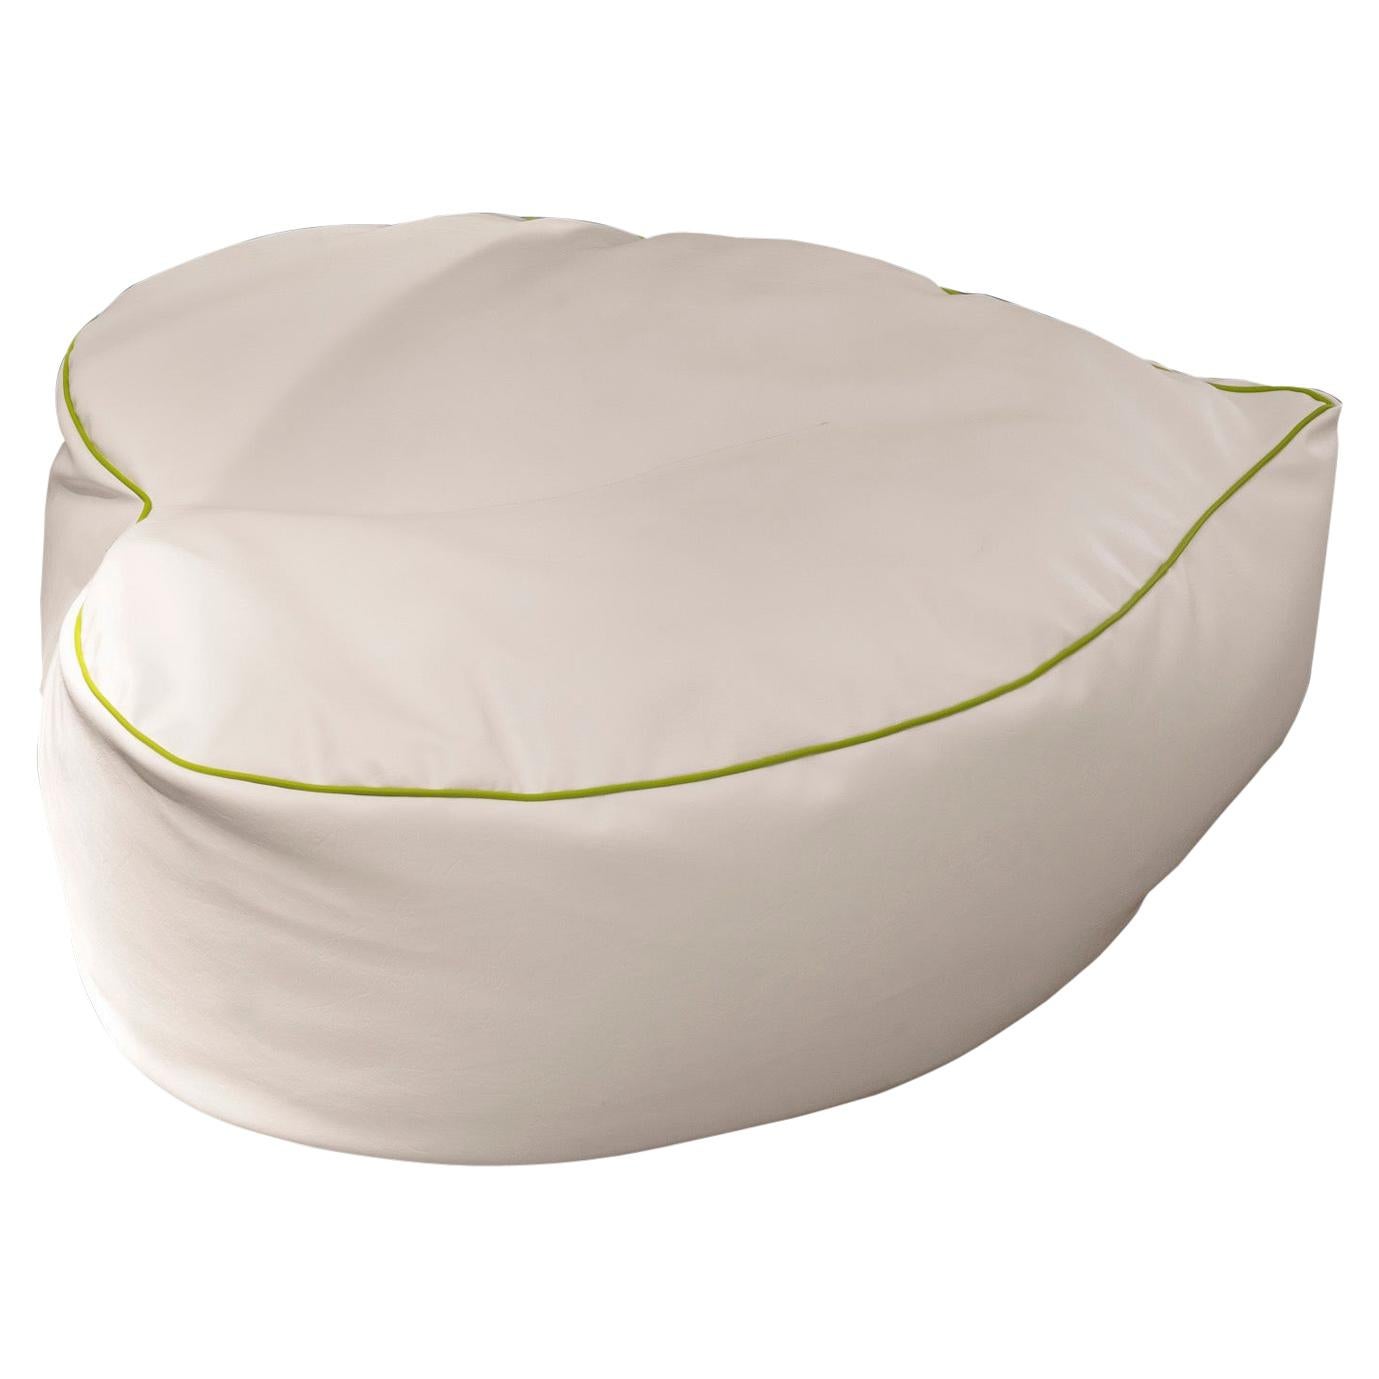 Pouf Potus Soft, for Outdoor, Waterproof Eco-Leather, Italy